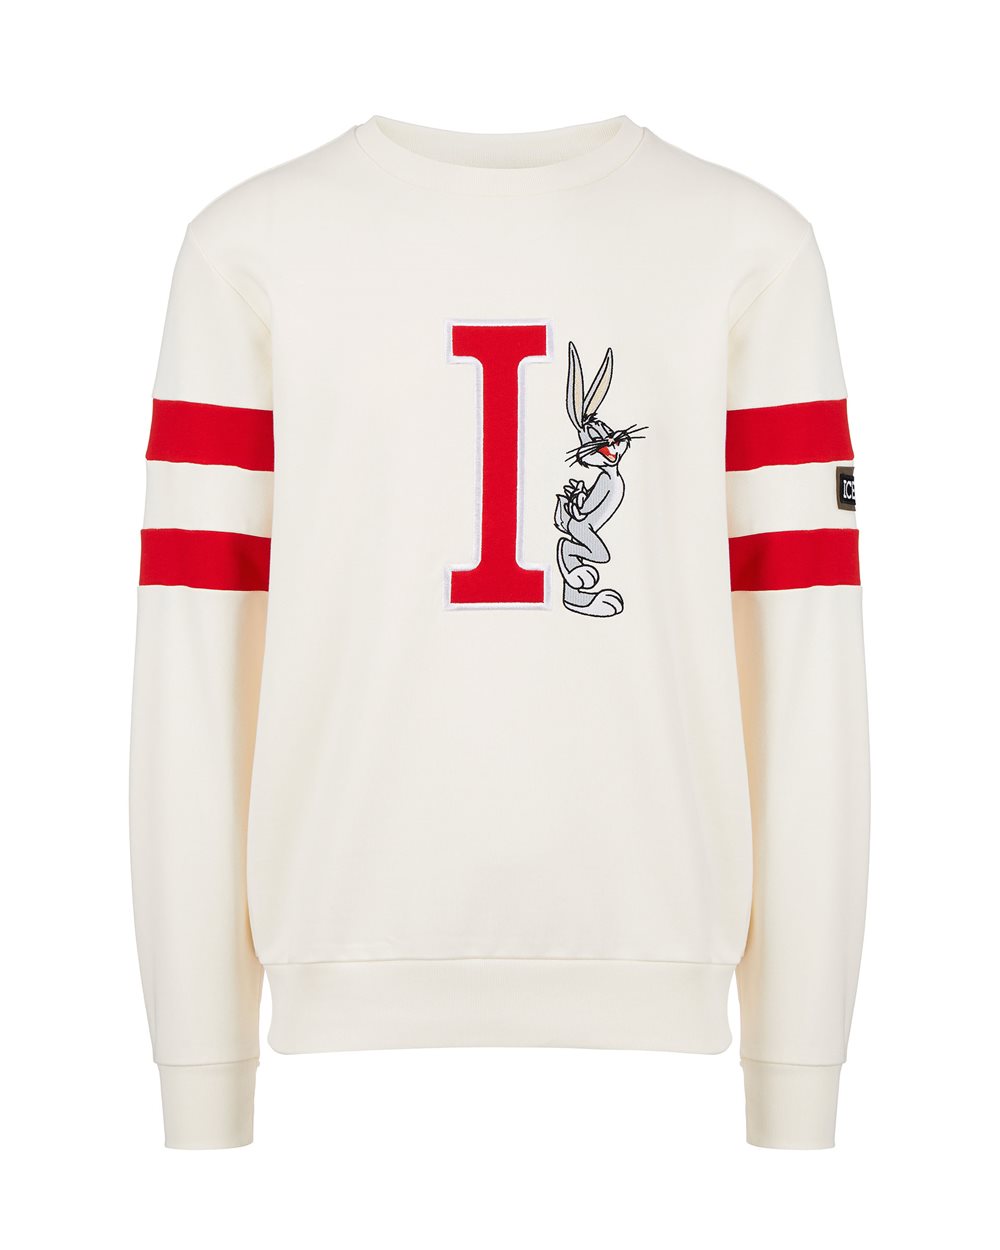 Sweatshirt with logo and Bugs Bunny - Carosello HP man SHOES | Iceberg - Official Website